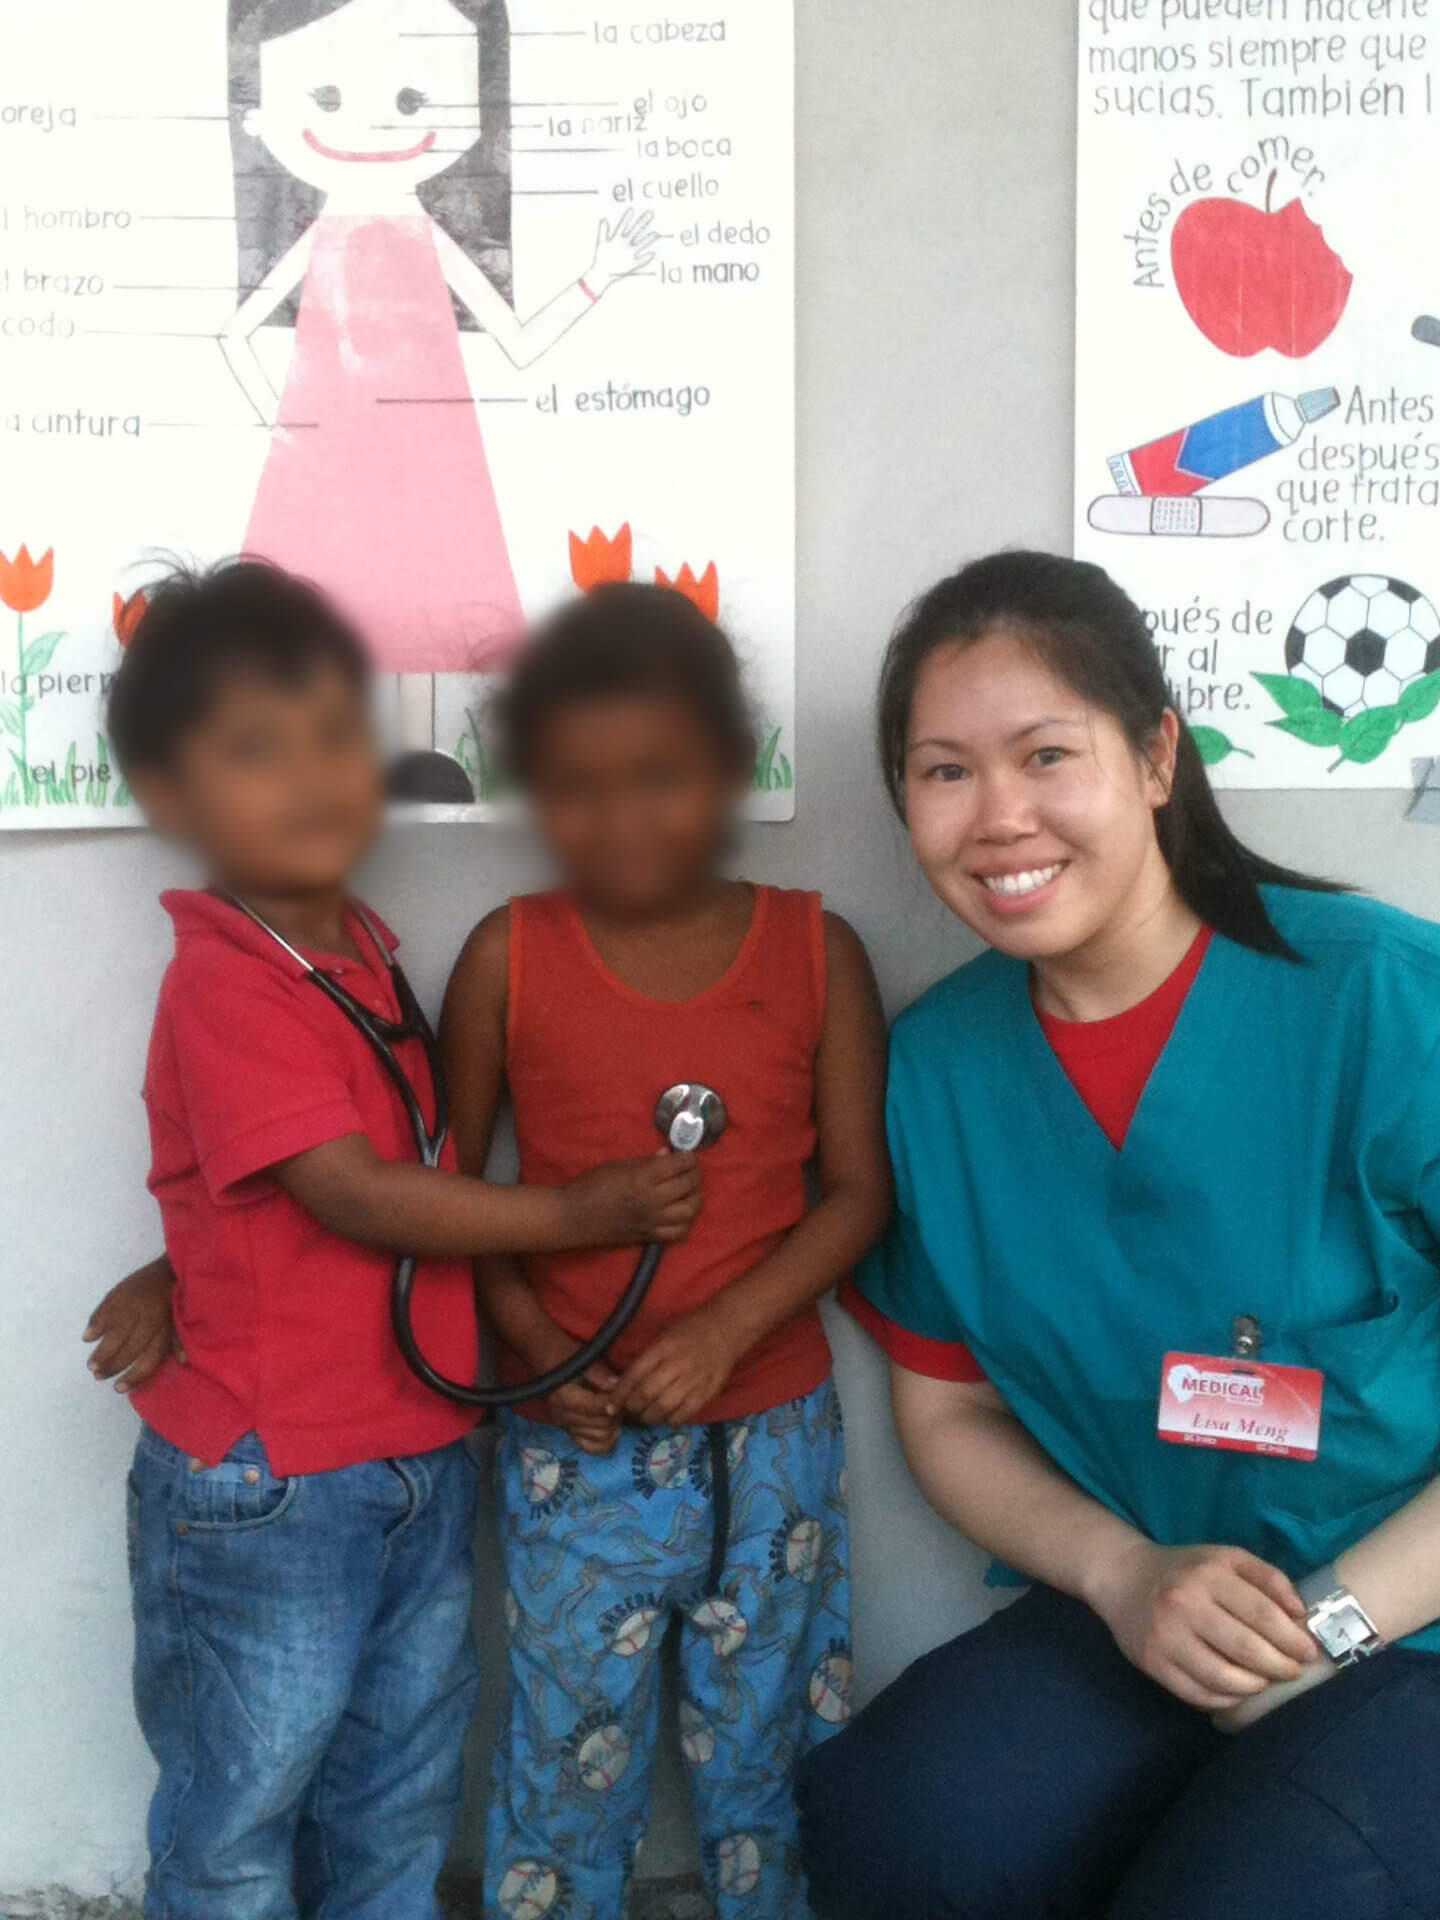 Meng completed a medical mission to Honduras in 2012 shadowing a gynecologist, orthodontists and internal physicians.